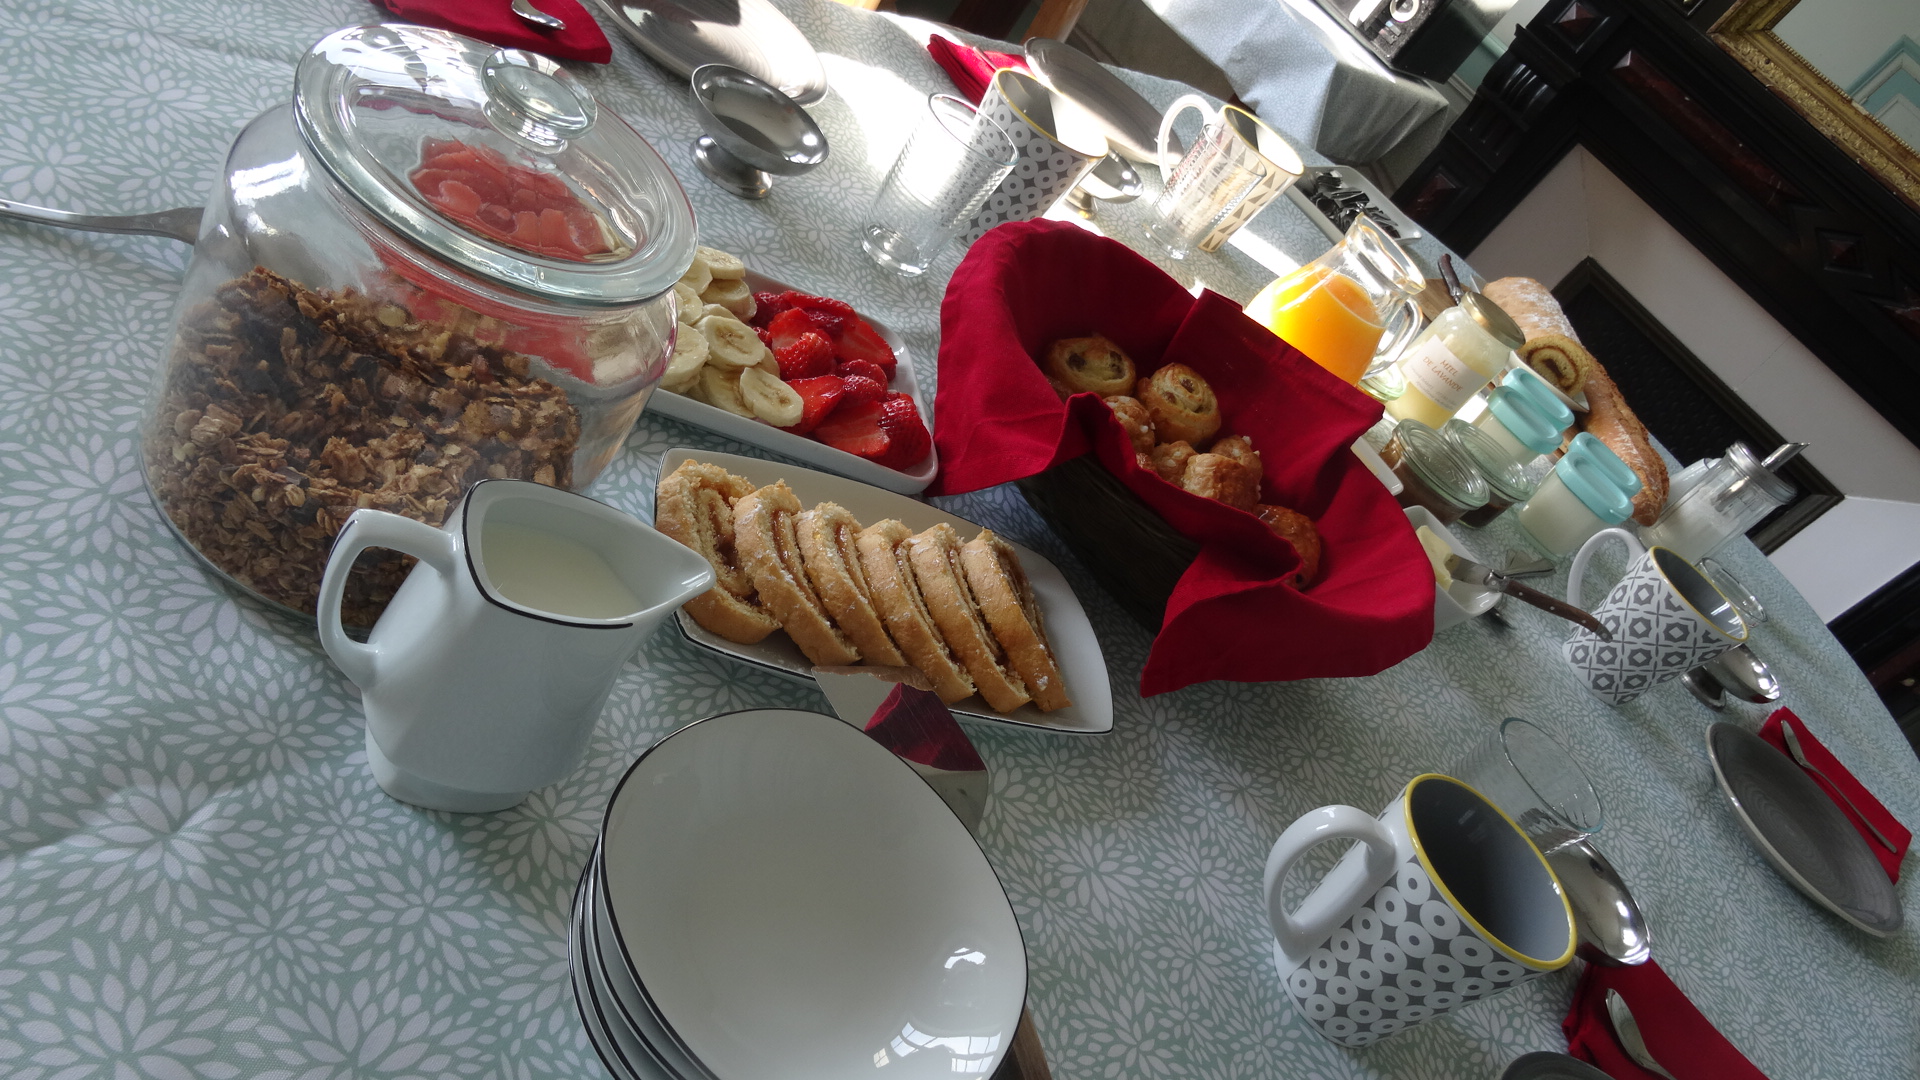 Breakfast with pastries, granola fruits and cakes